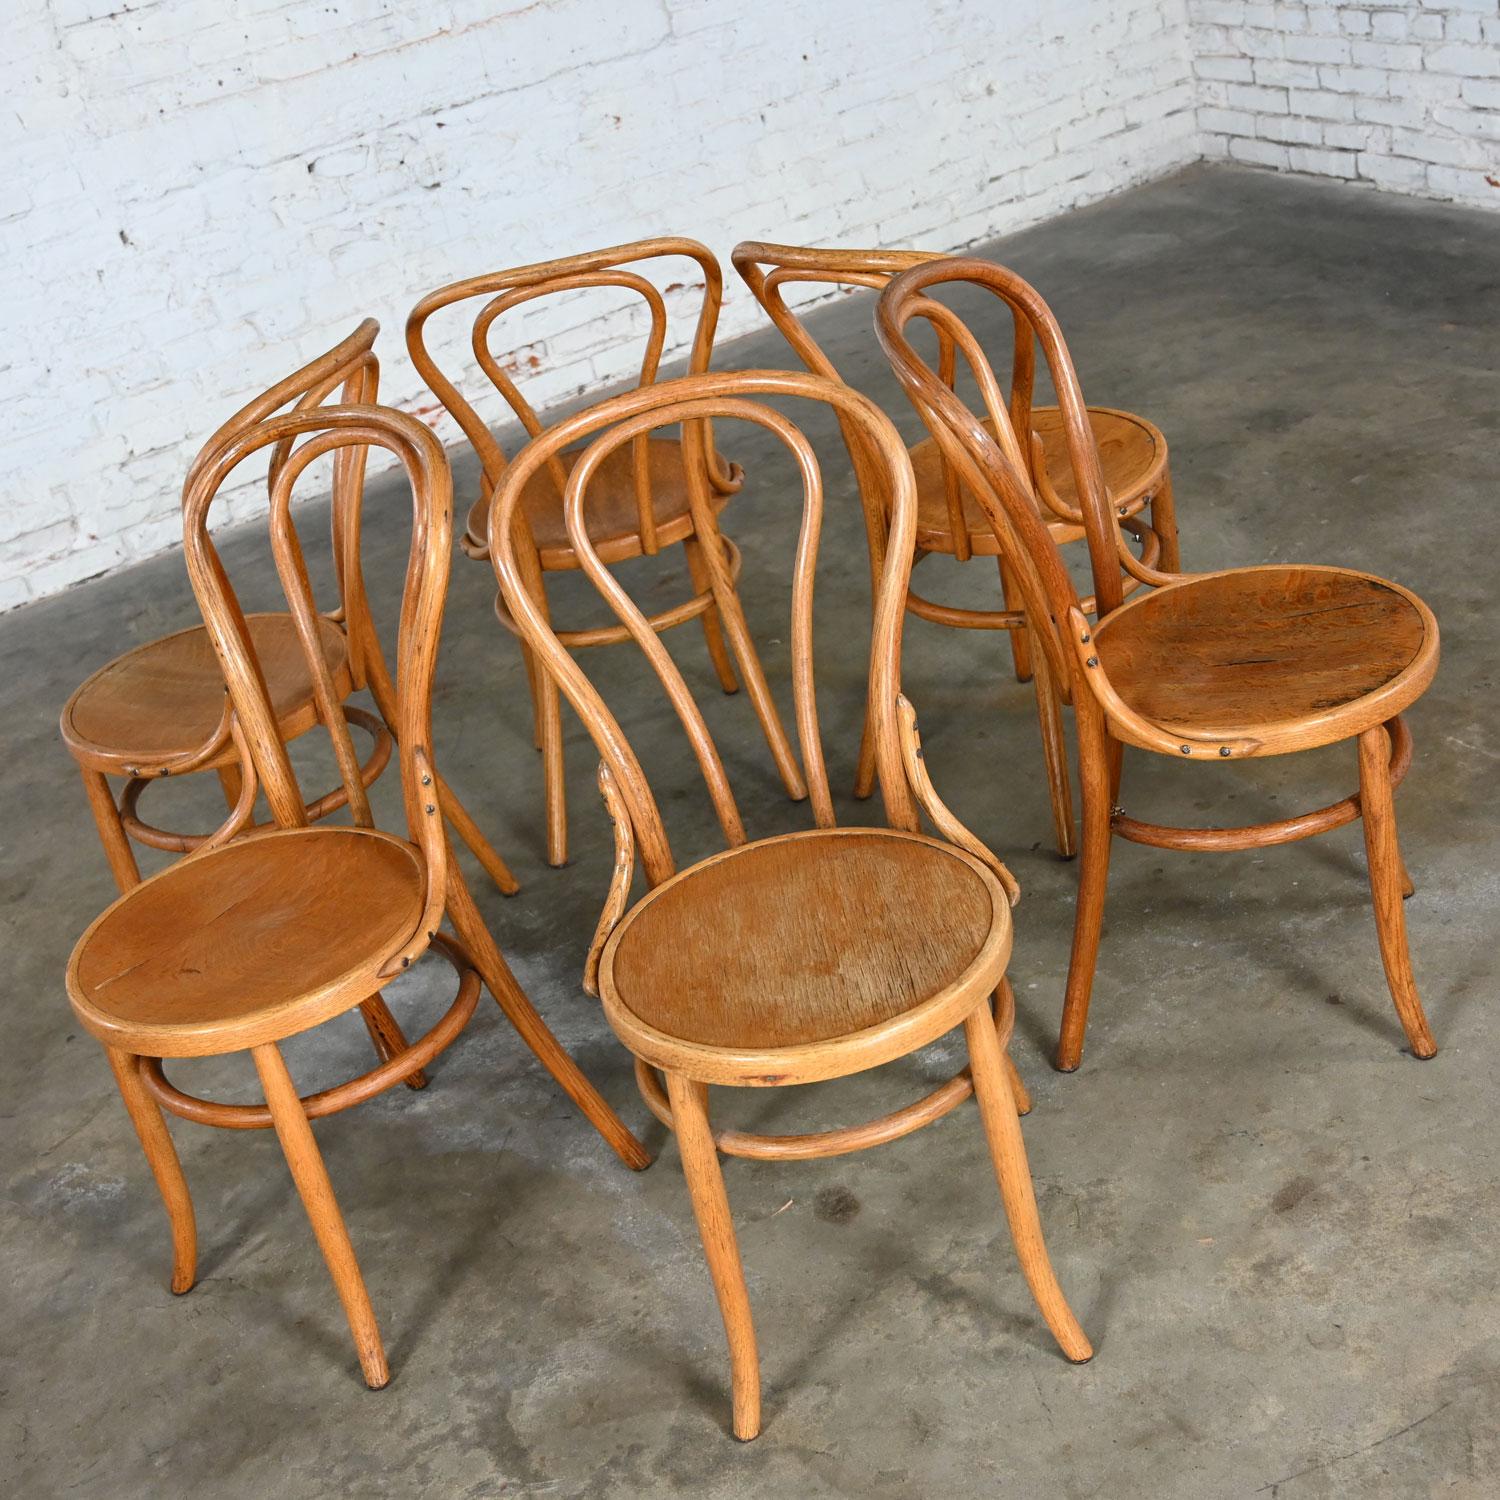 Handsome vintage Bauhaus style bentwood chairs attributed to Thonet #18 Café chair set of 6. These chairs have been attributed based upon archived research including online sources, vintage documentation and catalogs, designer literature, and other